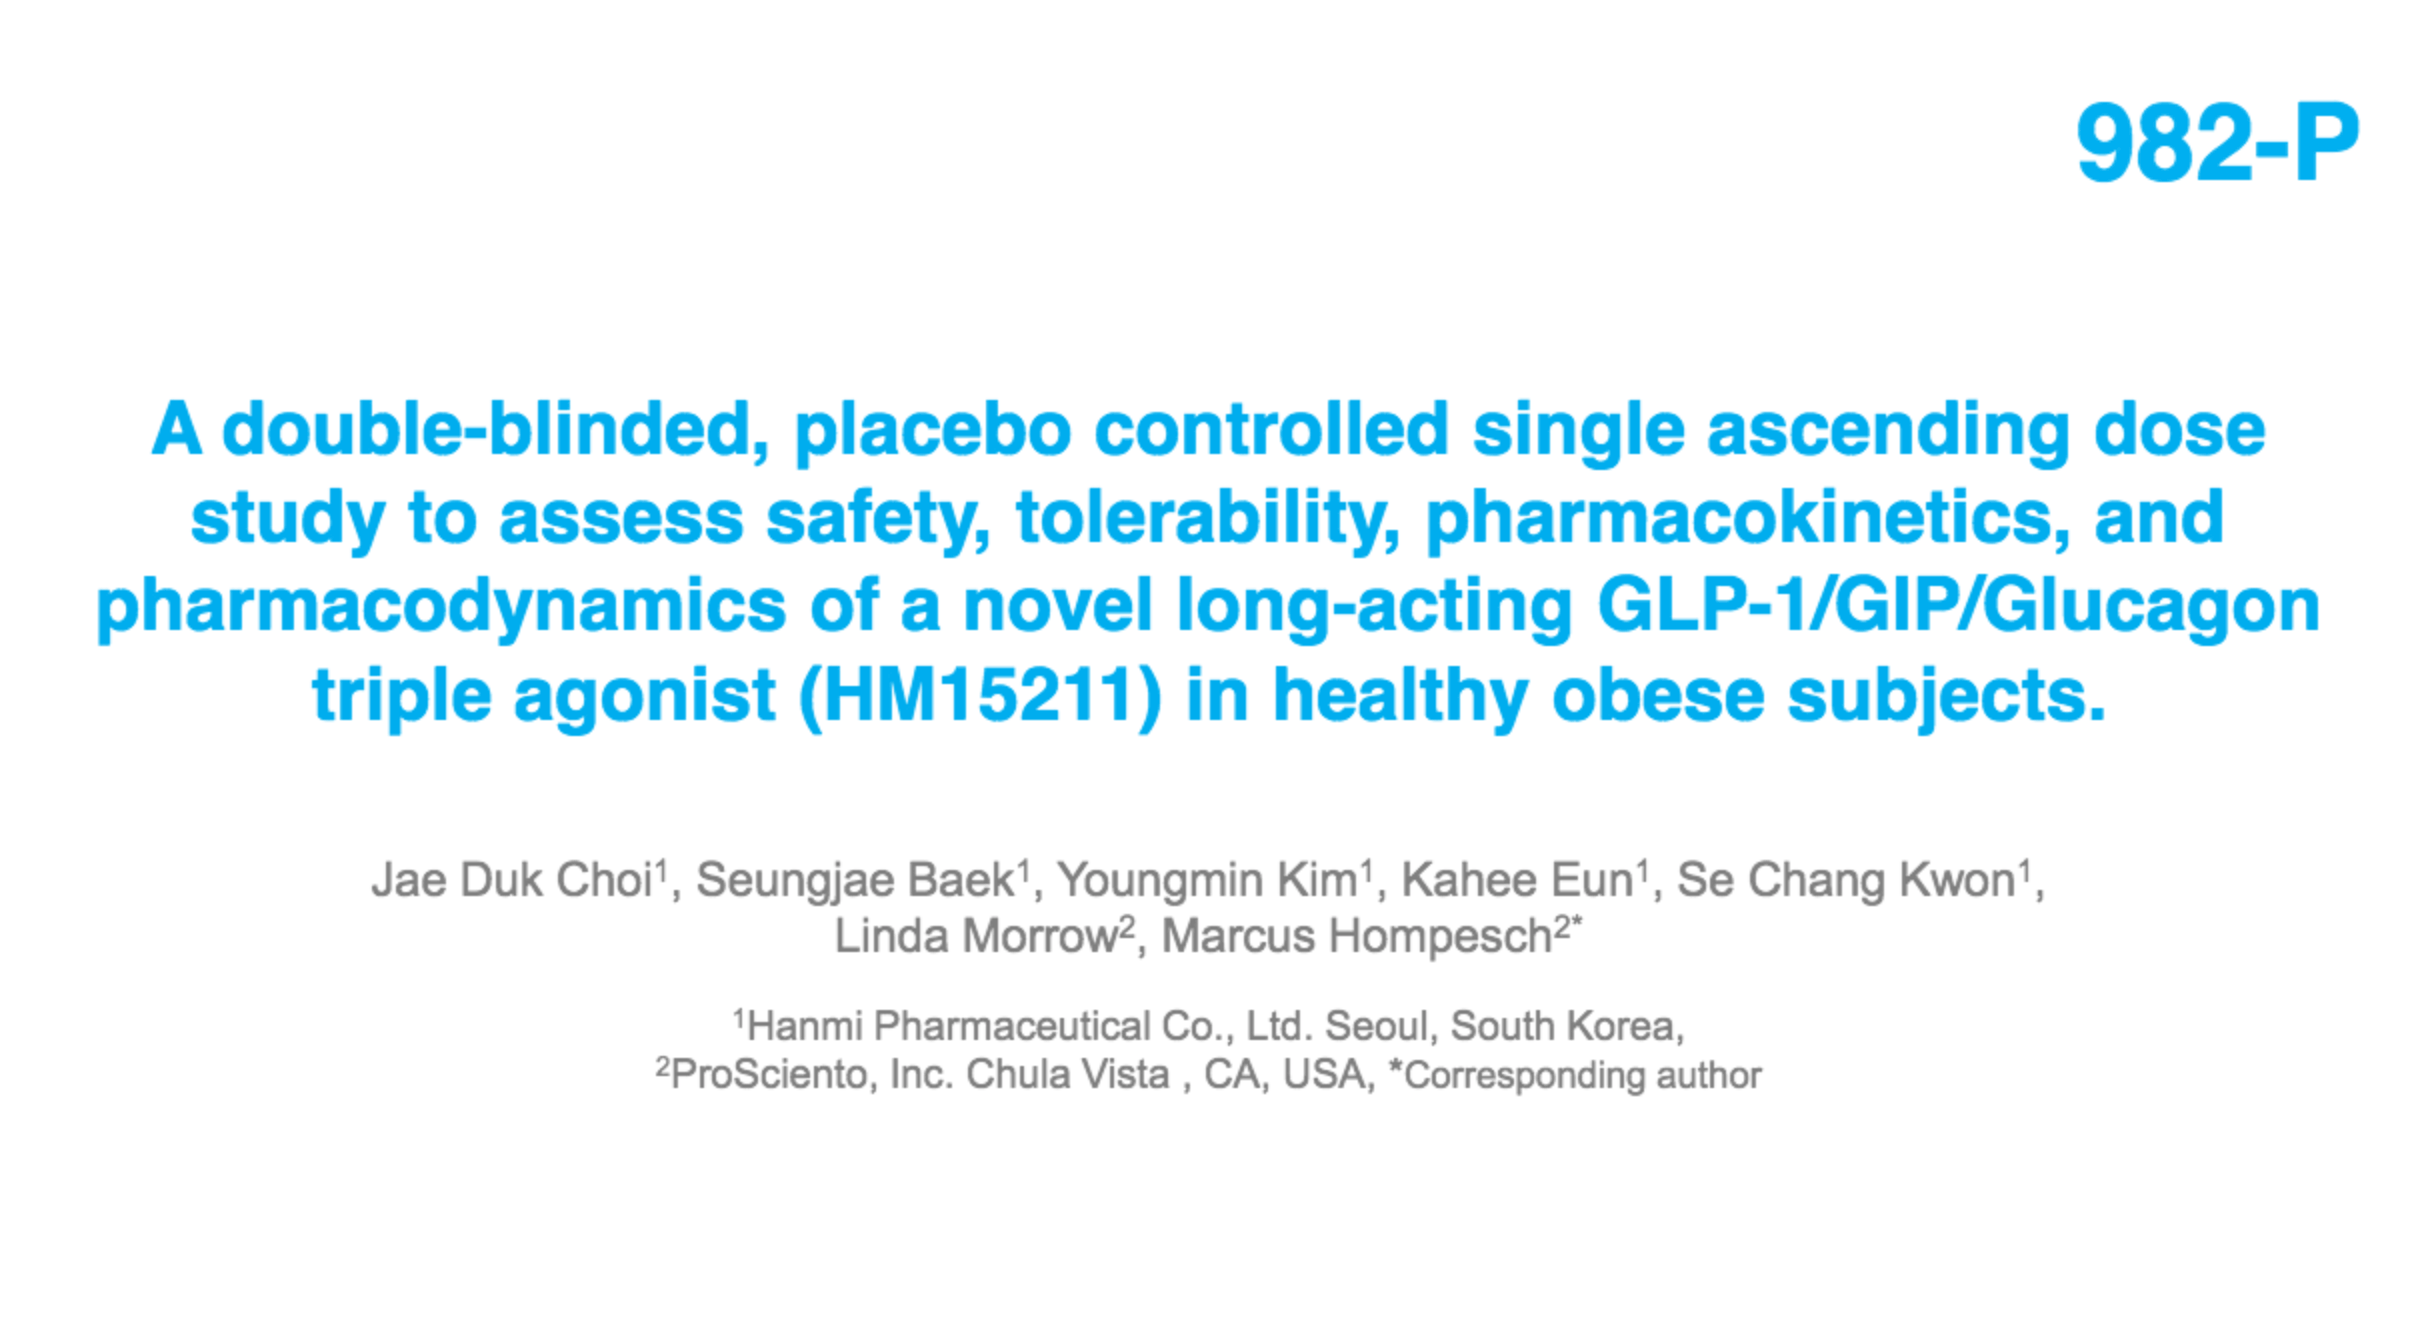 image of A Double-Blinded, Placebo Controlled, Single Ascending Dose Study for Safety, Tolerability, Pharmacokinetics, and Pharmacodynamics after Subcutaneous Administration of Novel Long-Acting GLP-1/GIP/Glucagon Triple Agonist (HM15211) in Healthy Obese